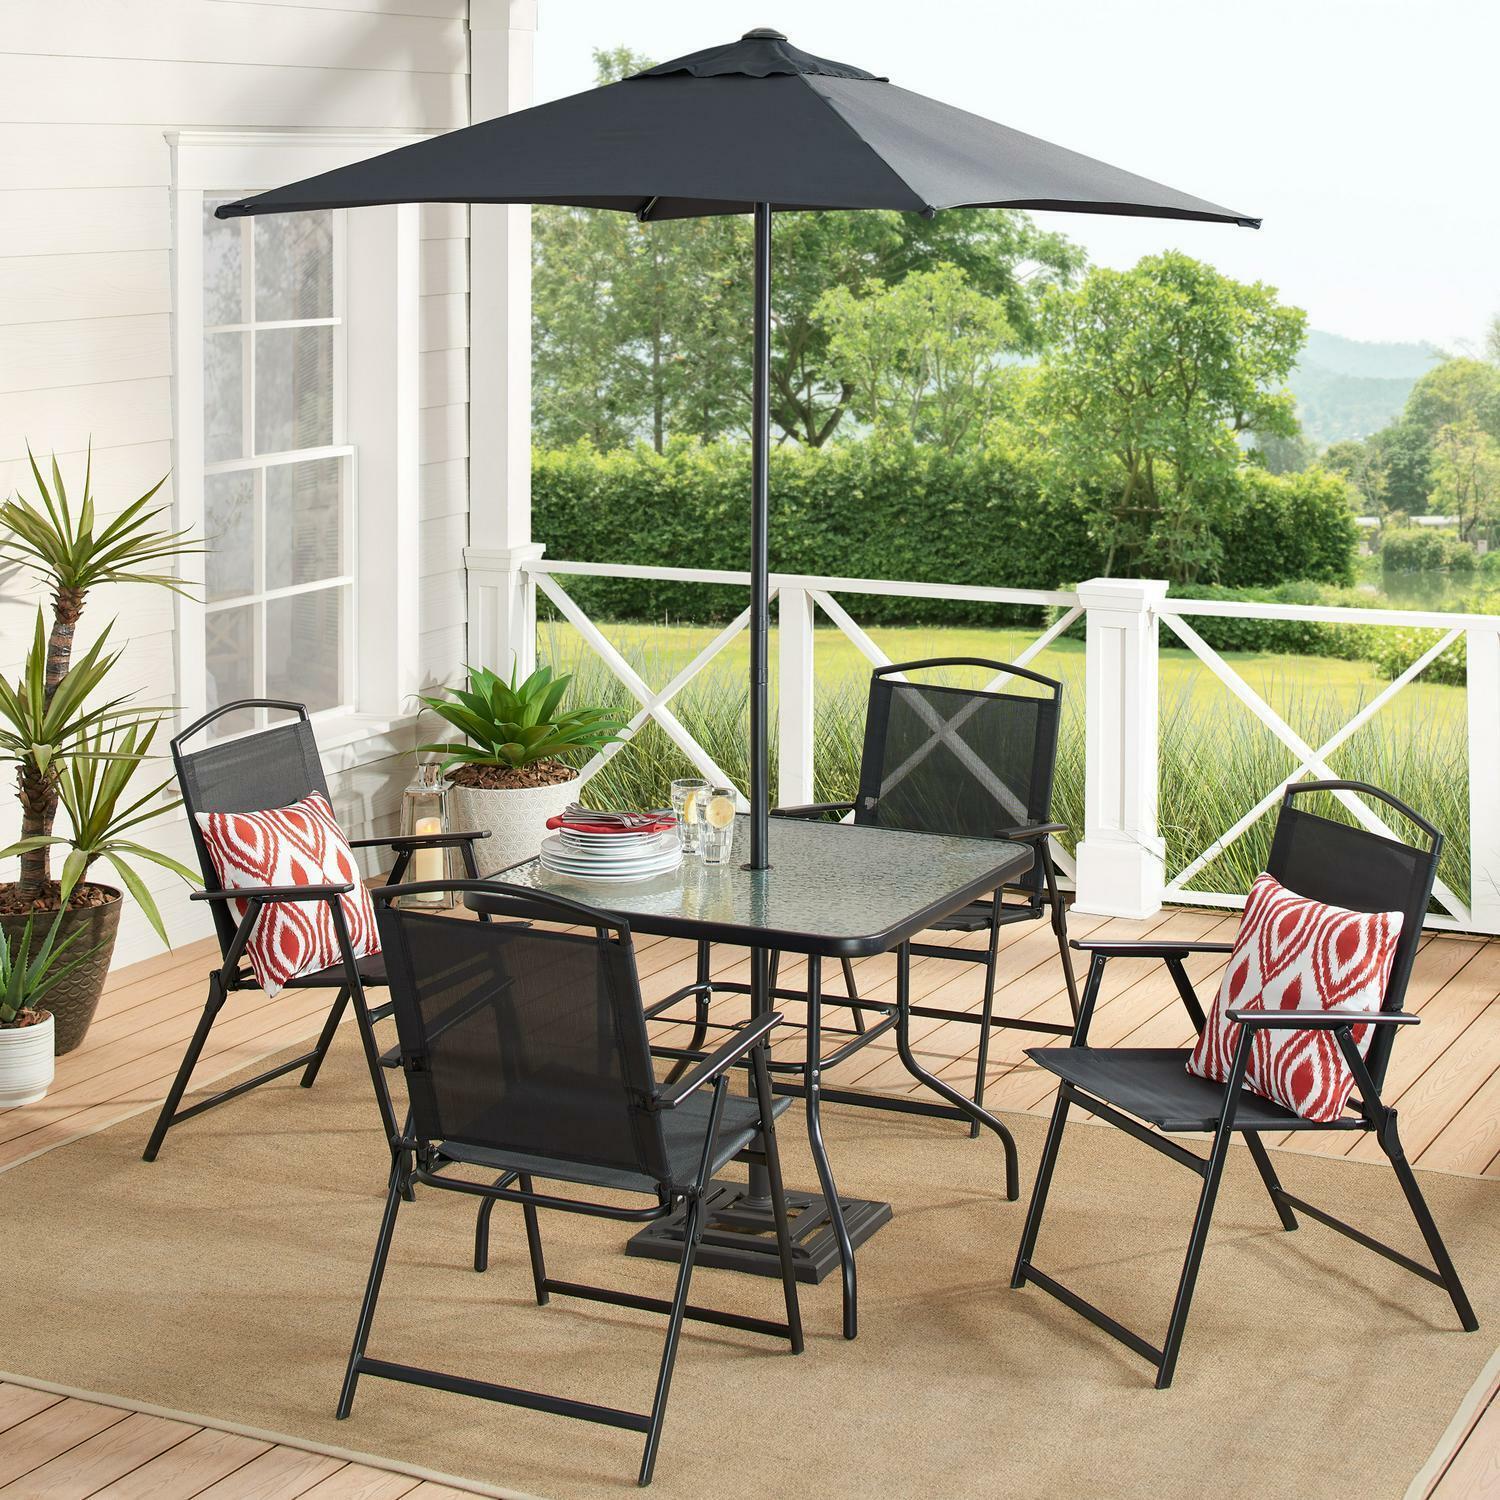 Primary image for Patio Dining Set 6-Piece Black Outdoor Garden Table and Chairs Umbrella Backyard